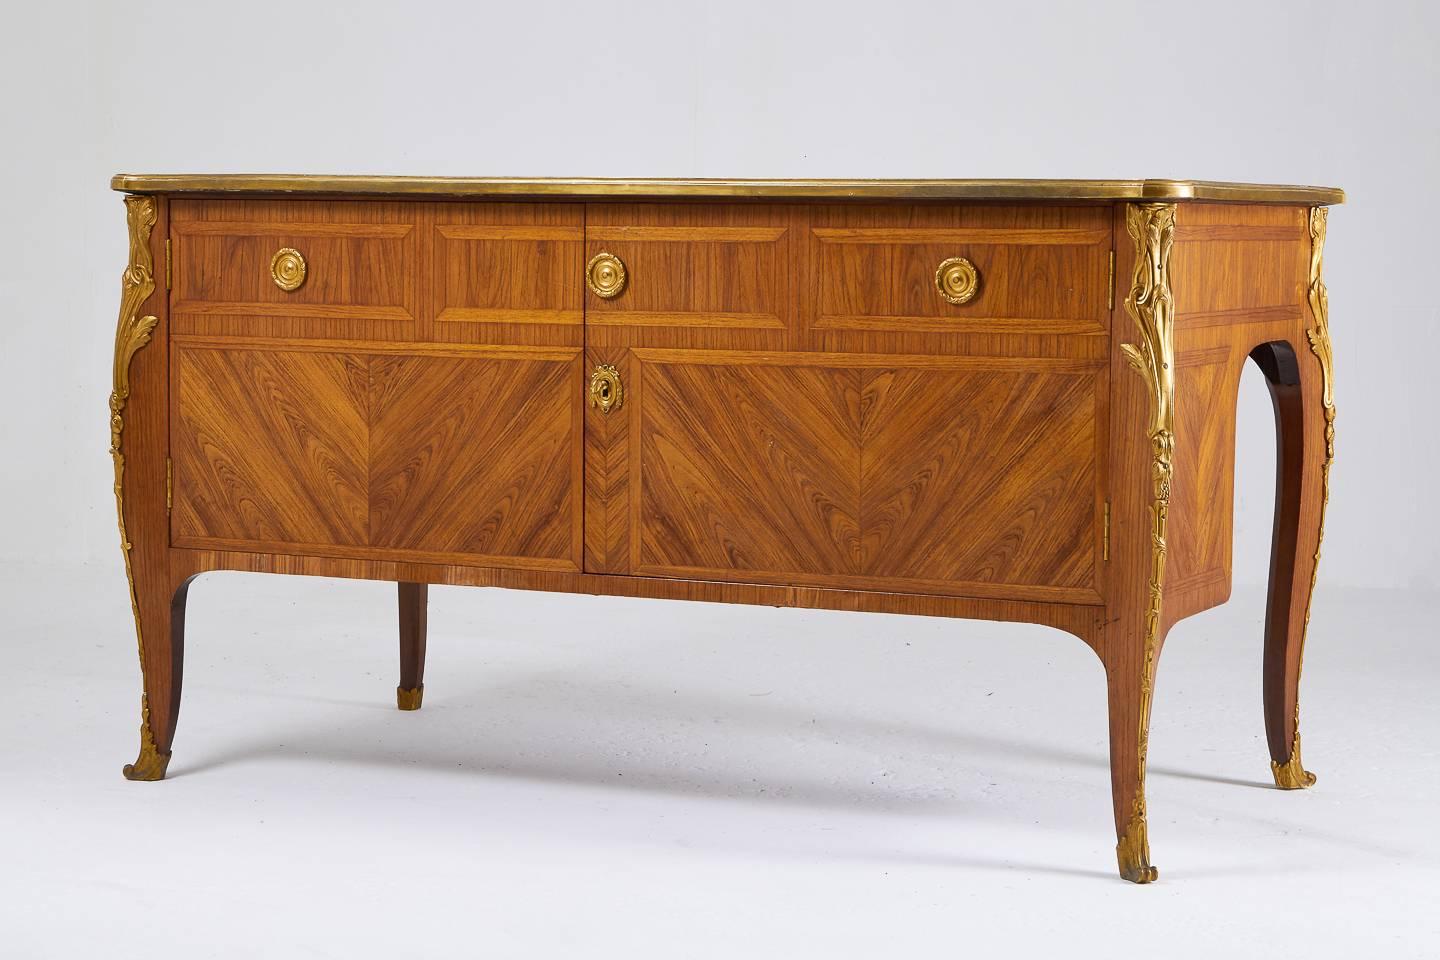 French 1940s Kingwood and Ormolu Mounted Bureau Plat In Good Condition For Sale In Husbands Bosworth, Leicestershire